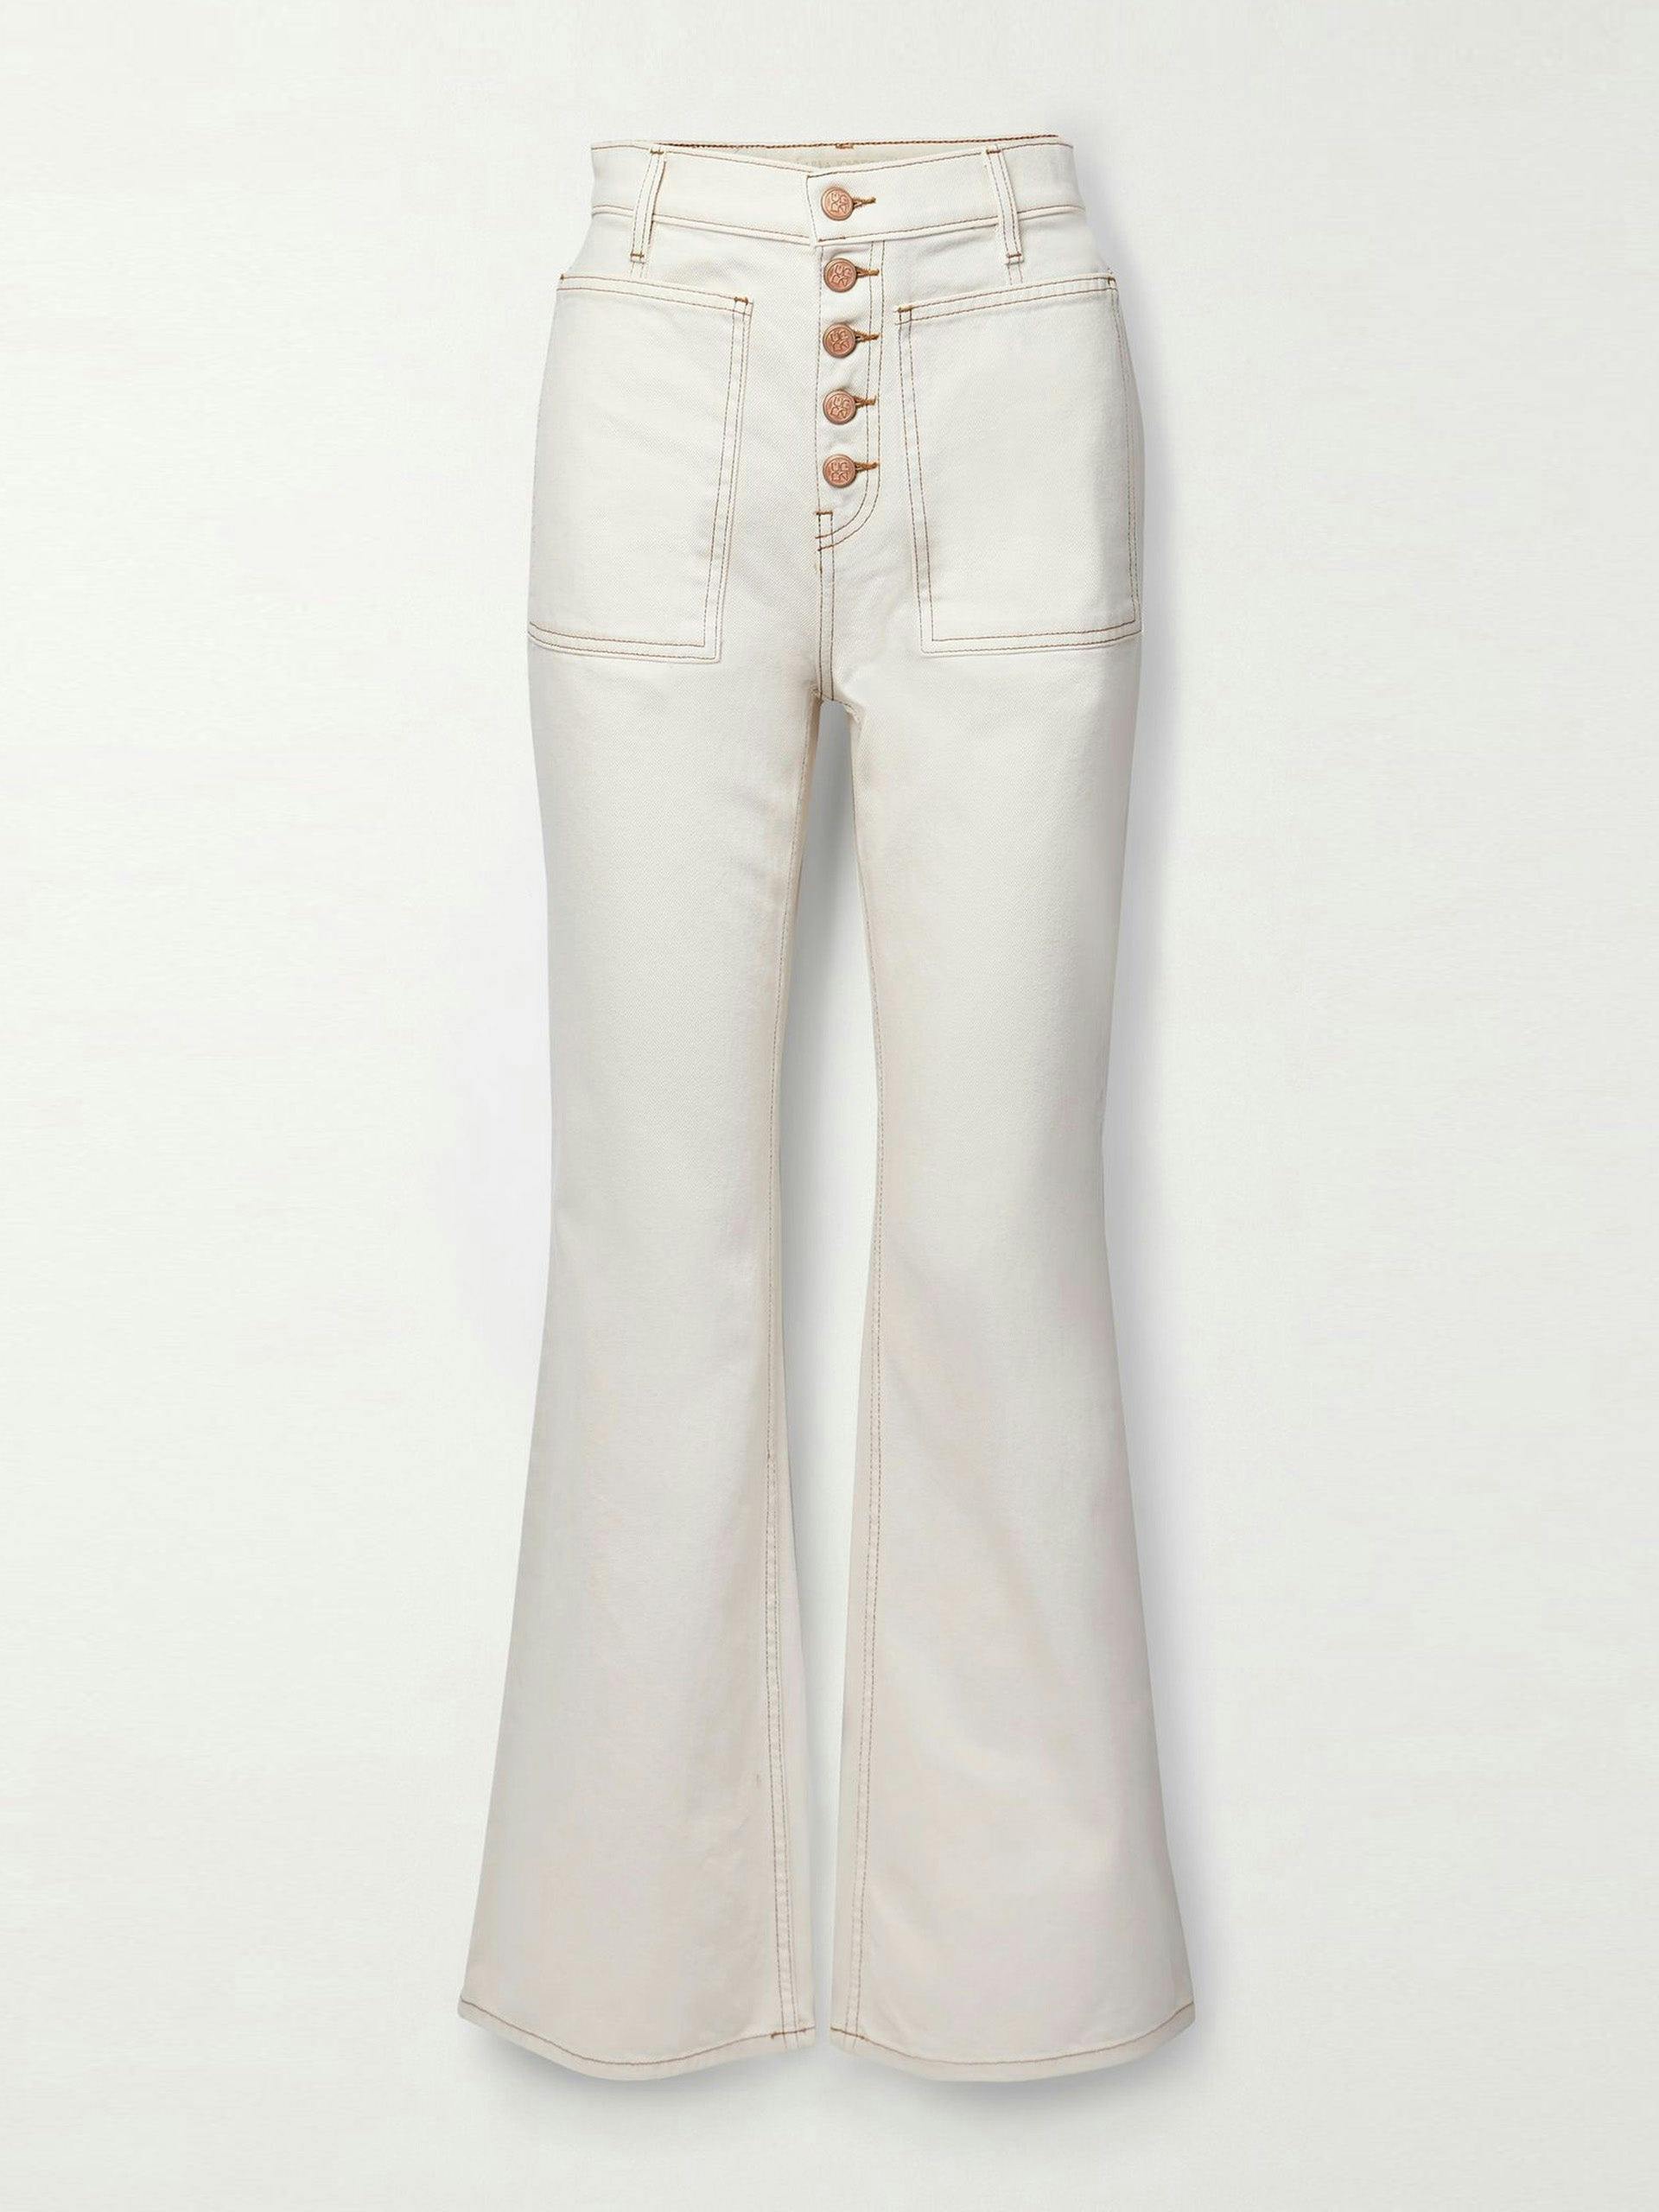 White cotton denim jeans with button front